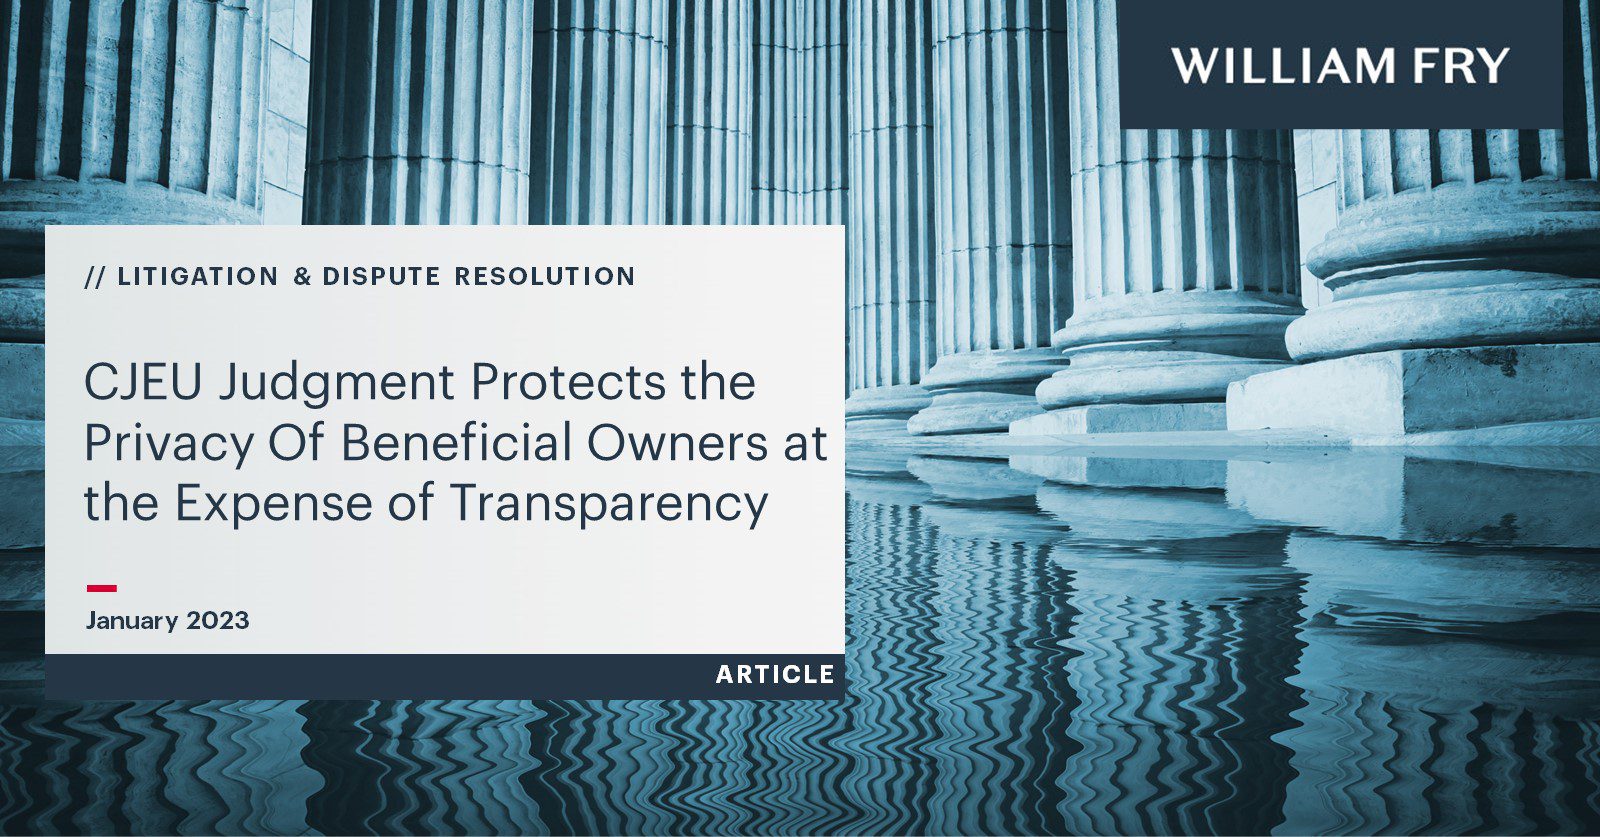 CJEU Judgment Protects the Privacy Of Beneficial Owners at the Expense of Transparency